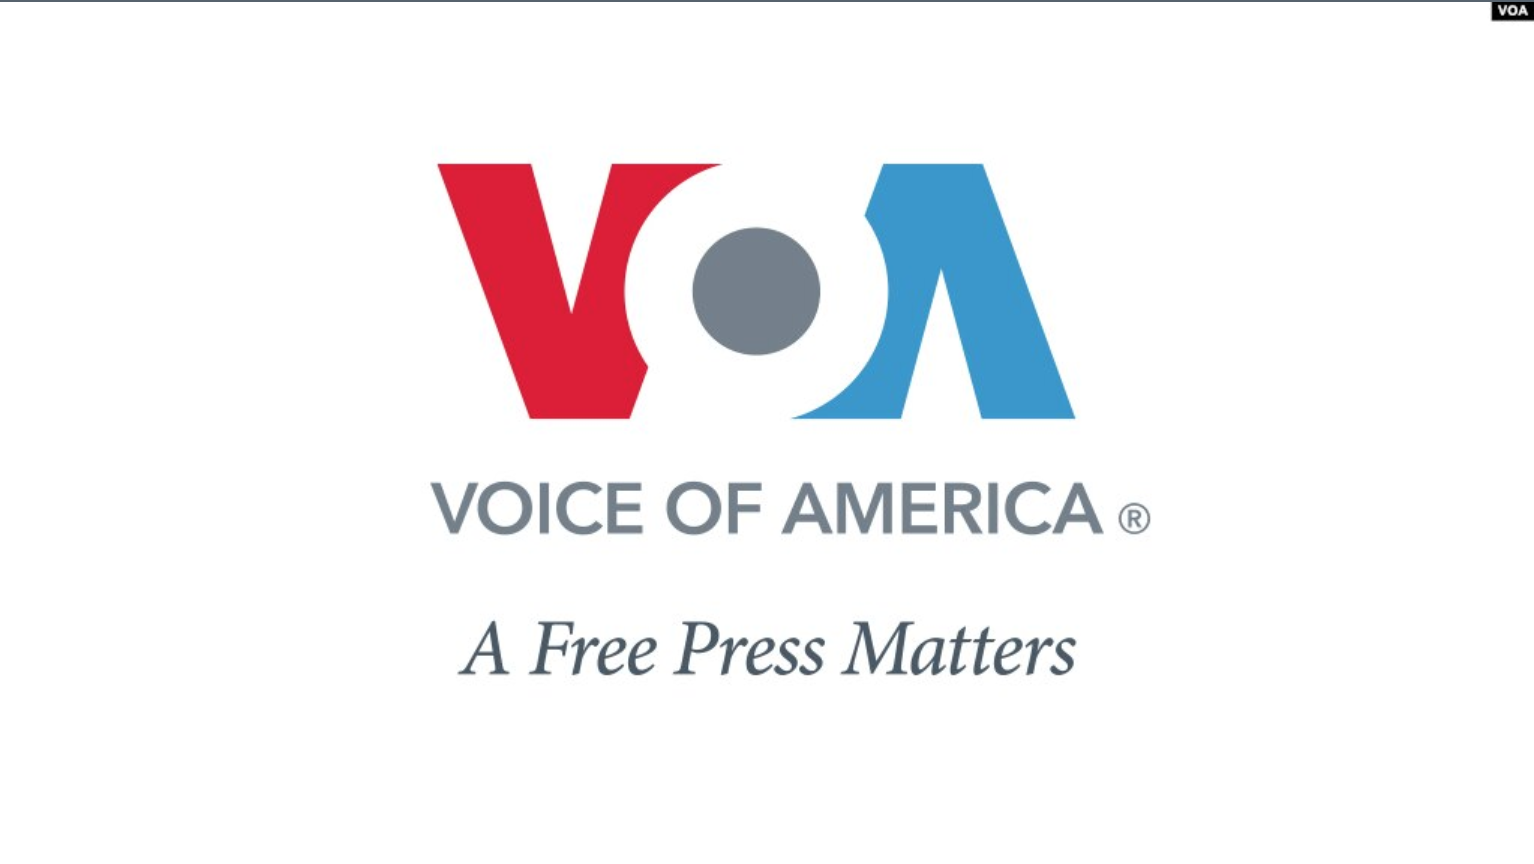 VOA denounces the arrests of multiple journalists in Iran